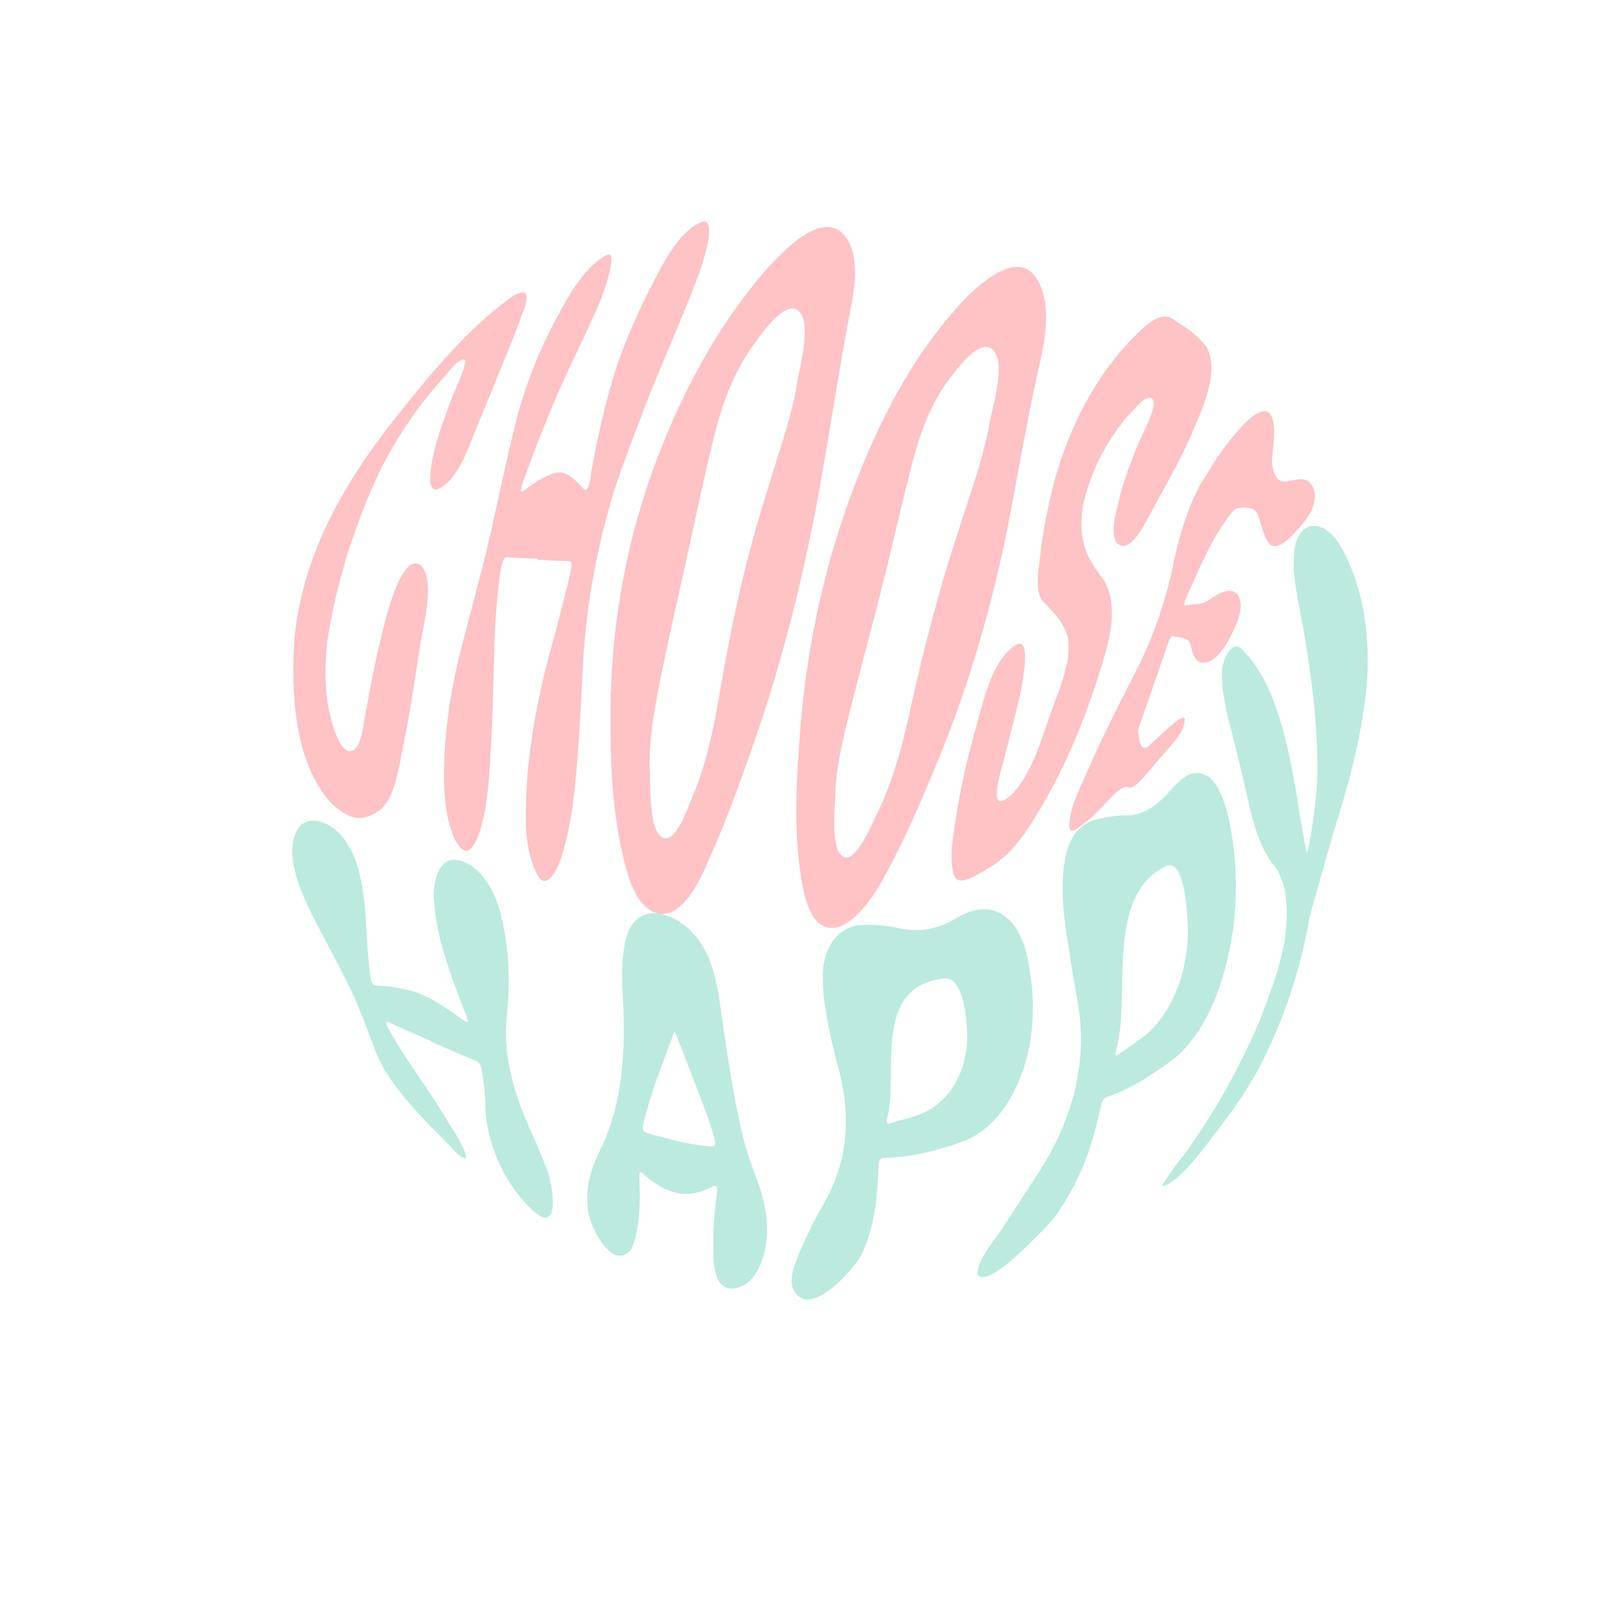 Choose happy. Hand written lettering in circle shape. Retro style, 70s poster